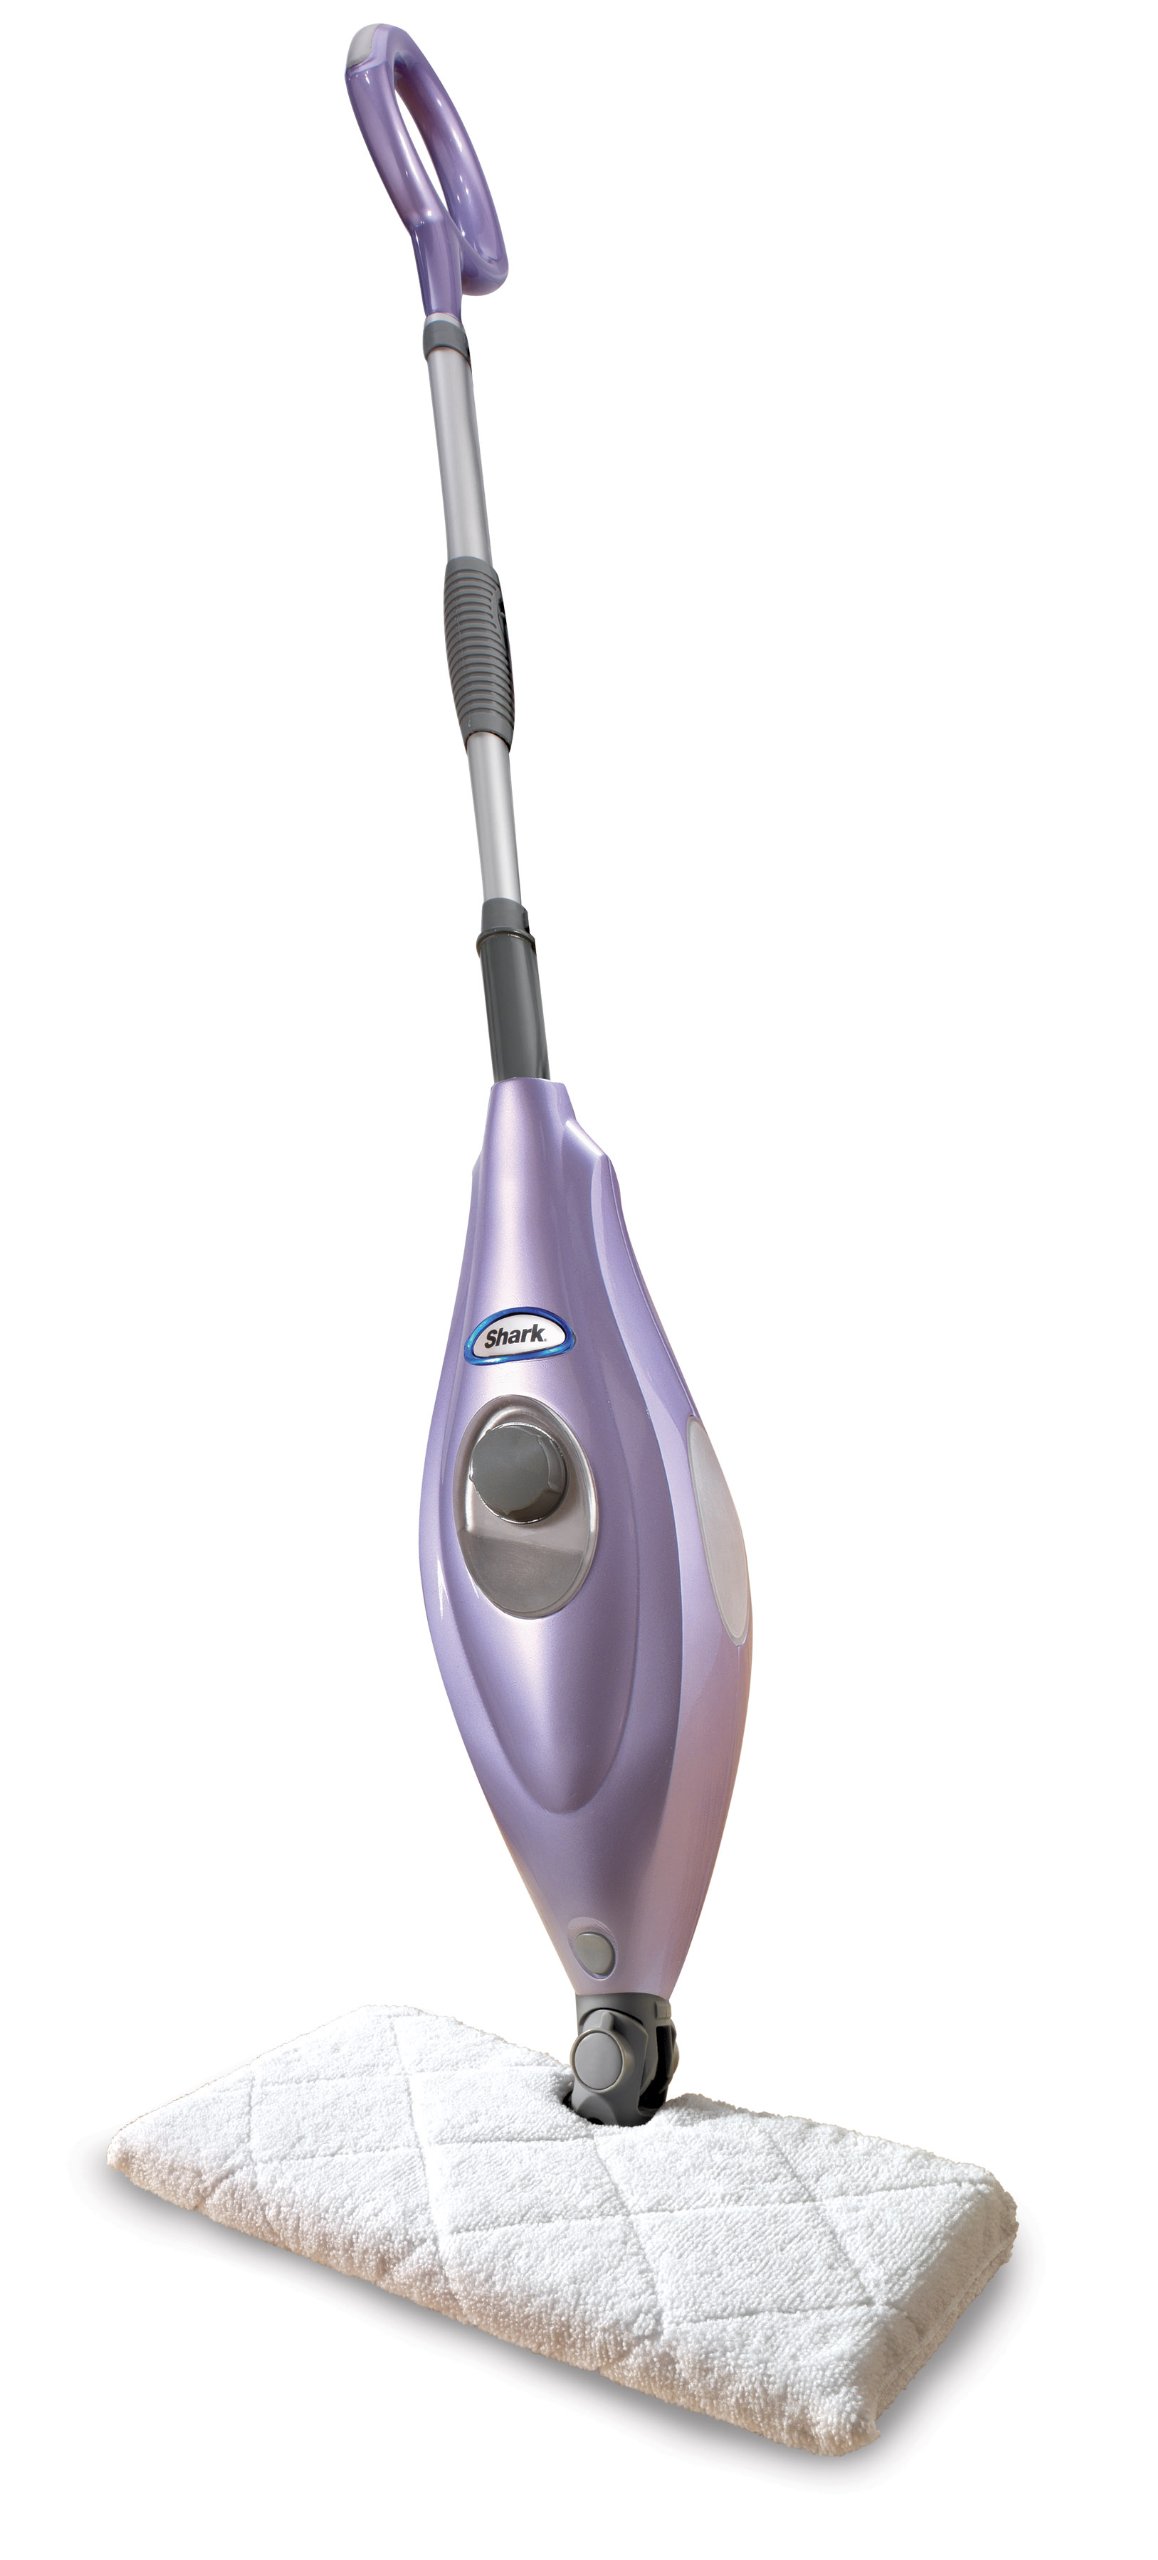 Prime: Shark Steam Pocket Mop Hard Floor Cleaner w/ Rectangle Head & 2 Washable Pads (Purple) $51.29 + Free Shipping